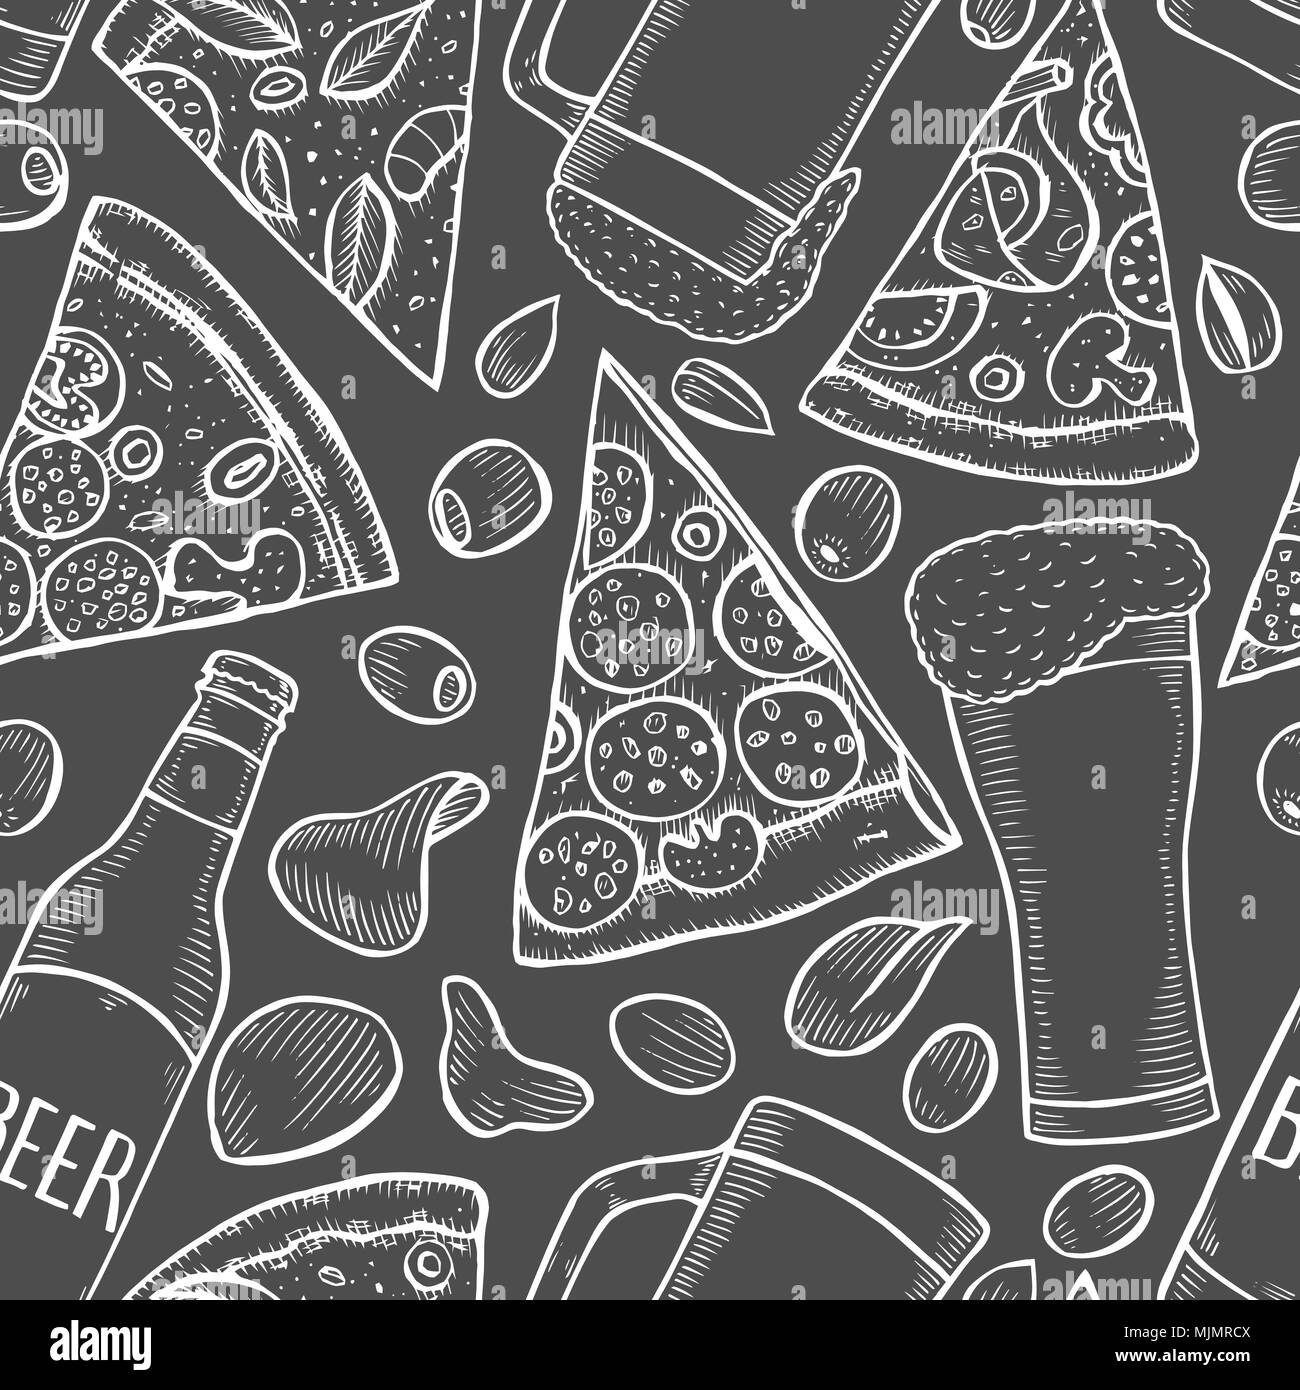 Monochrome Seamless pattern background of beer and pizza in an old engraving style. Stock Vector